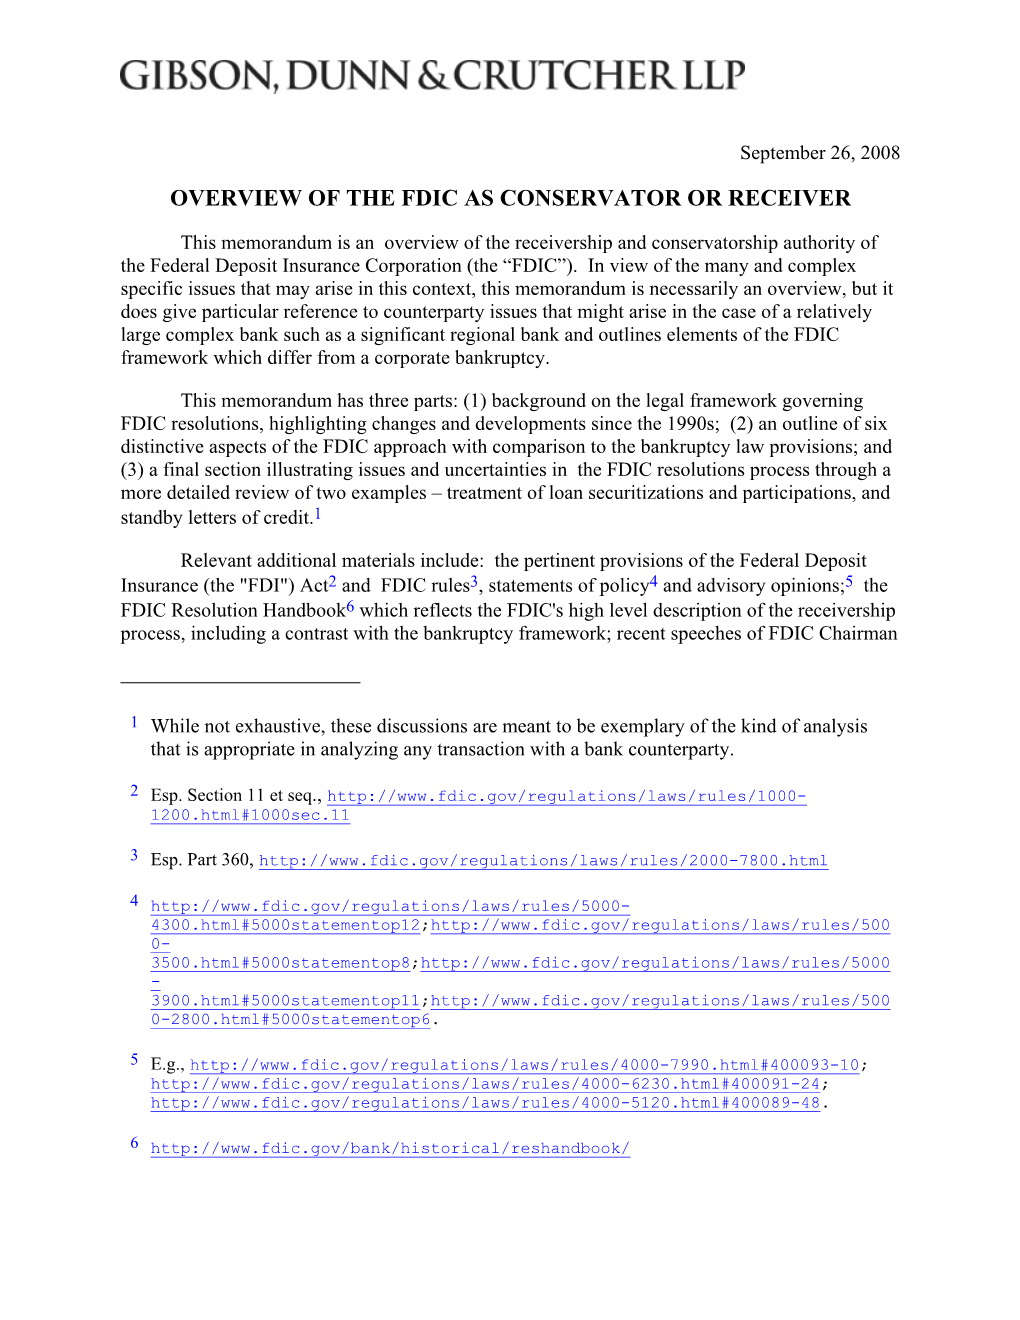 Overview of the Fdic As Conservator Or Receiver